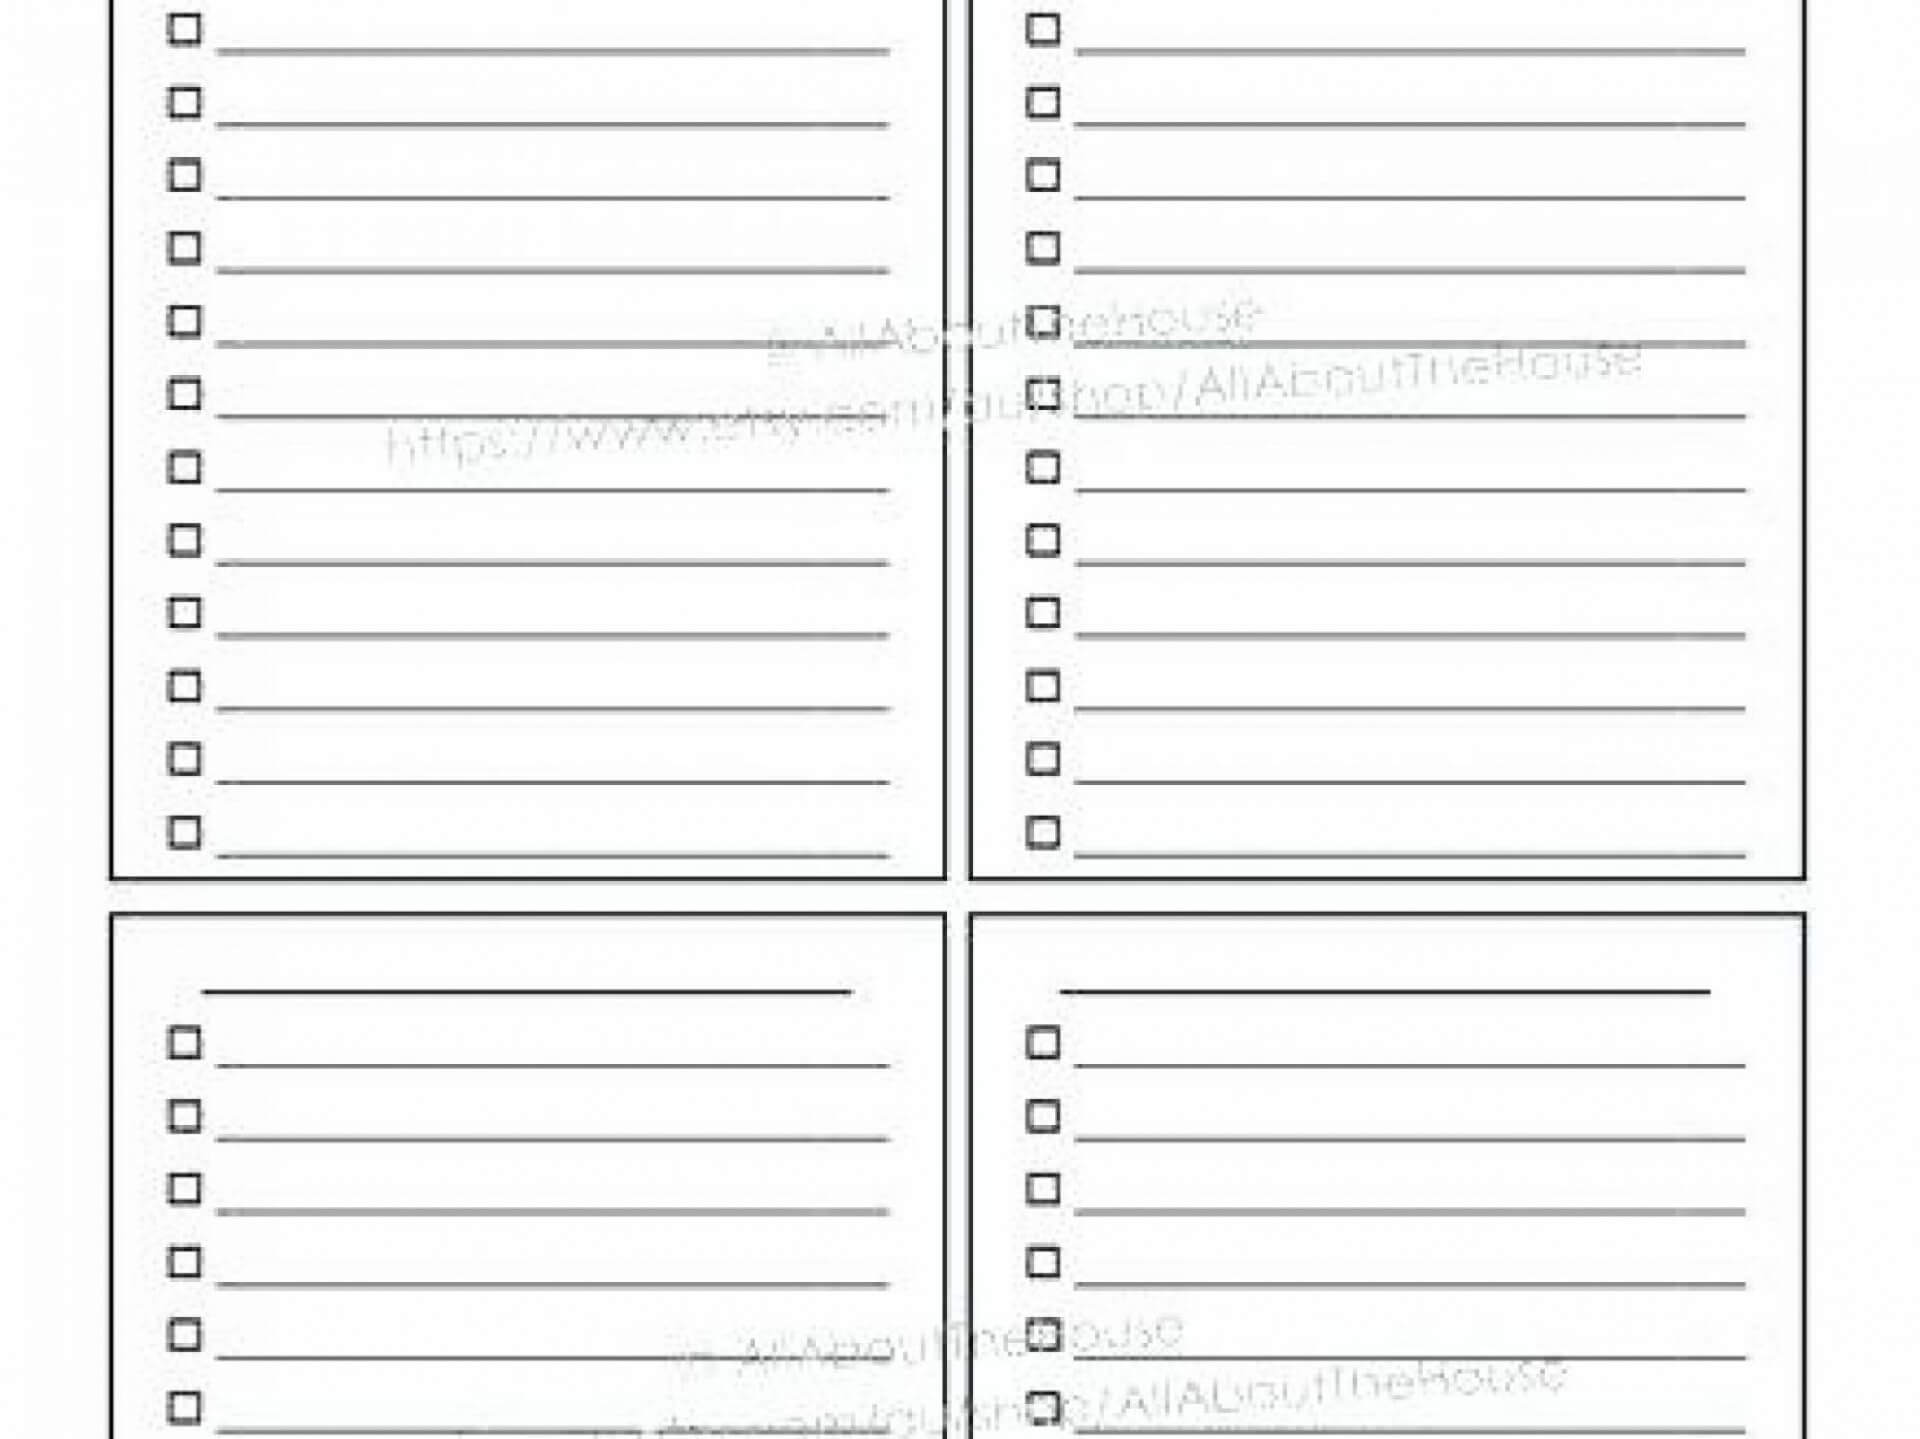 022 Todo List Template Word Spring Cleaning Checklist Within Blank Checklist Template Pdf